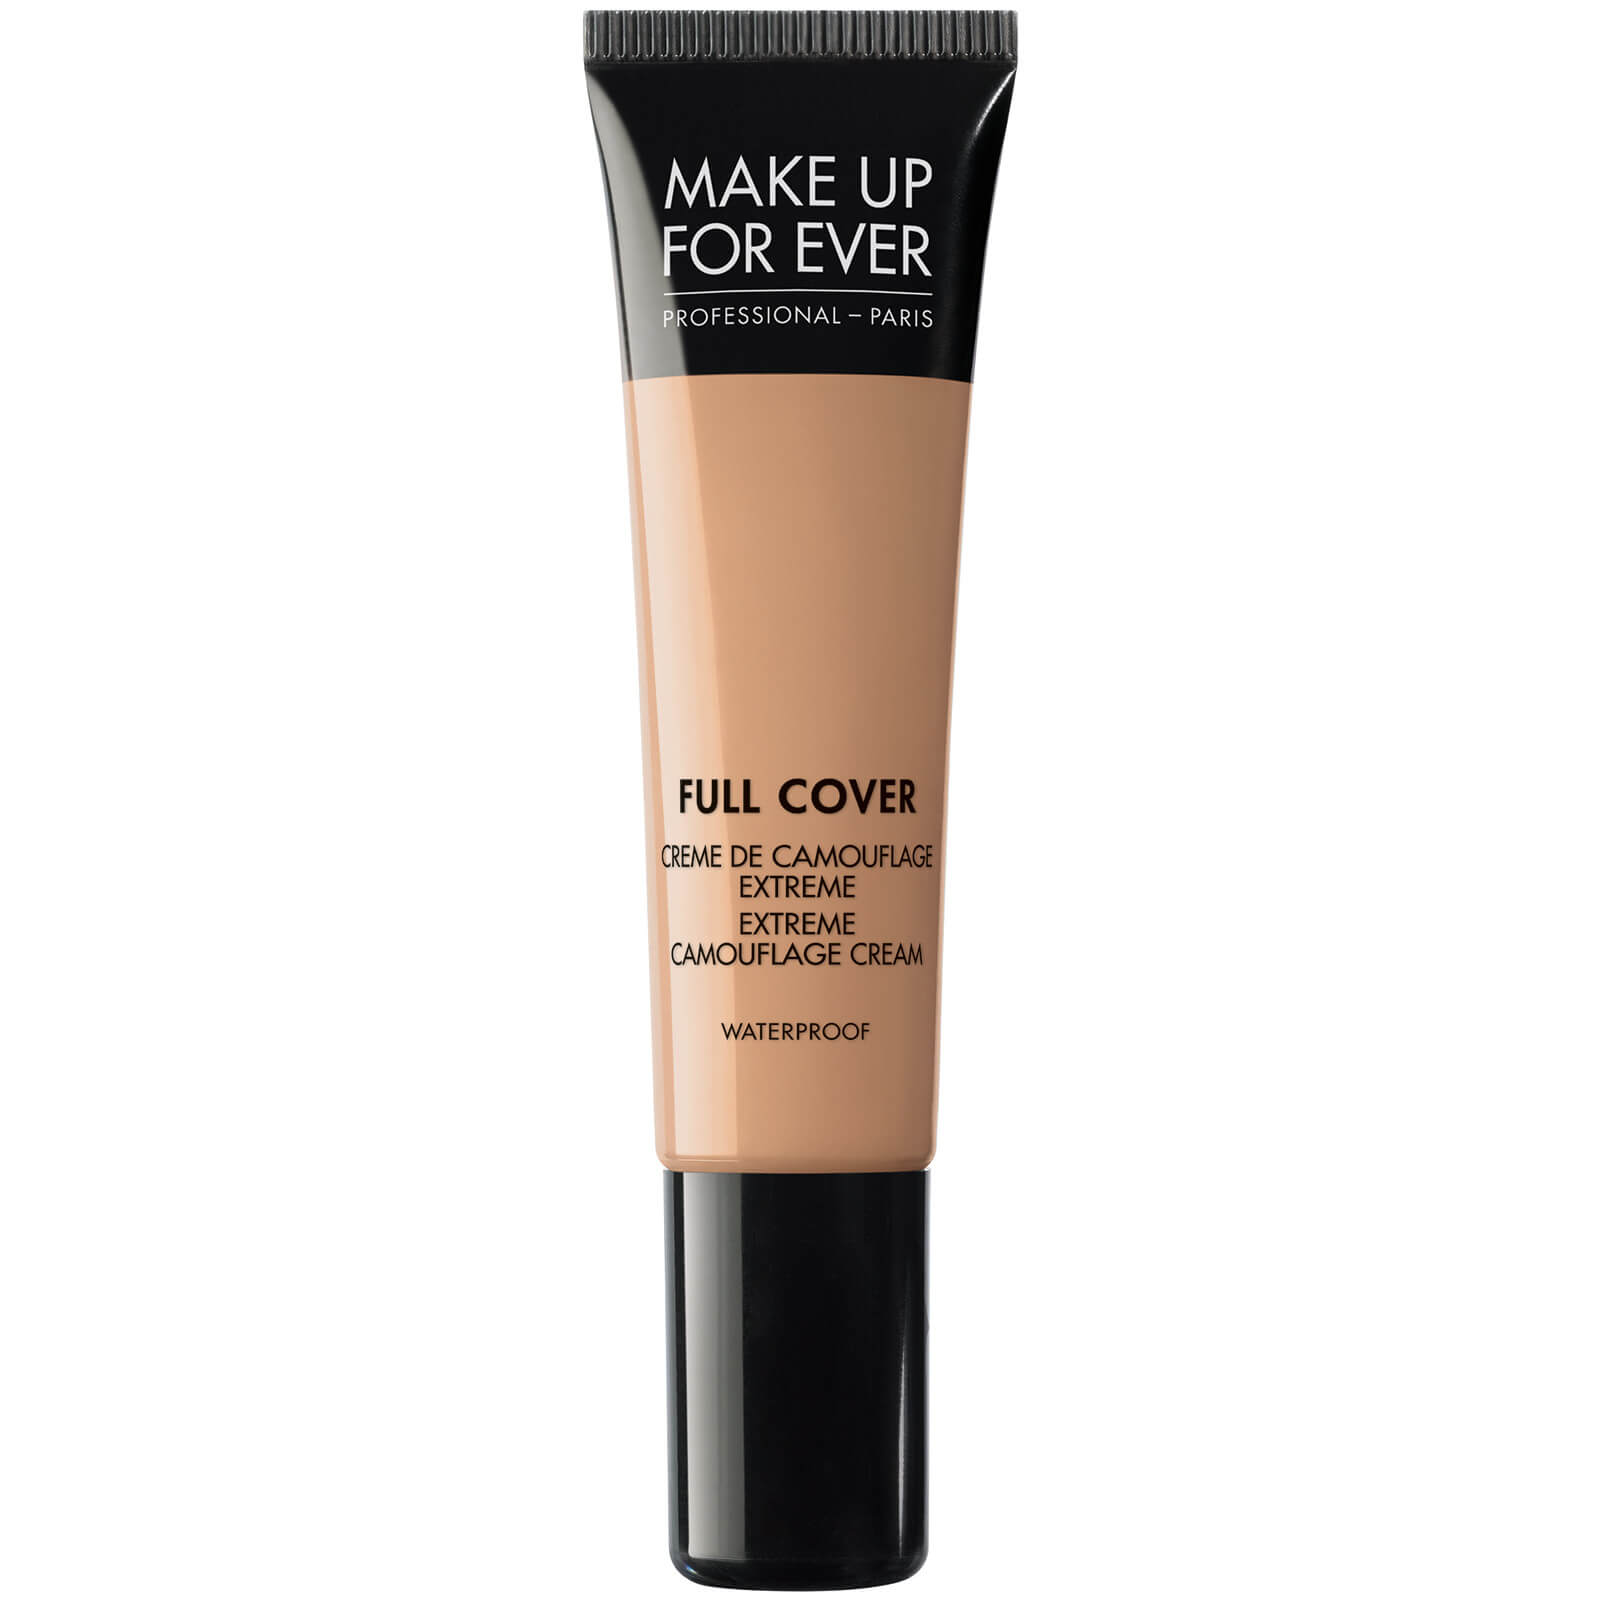 MAKE UP FOR EVER full Cover Concealer 15ml (Various Shades) - - 8-Beige